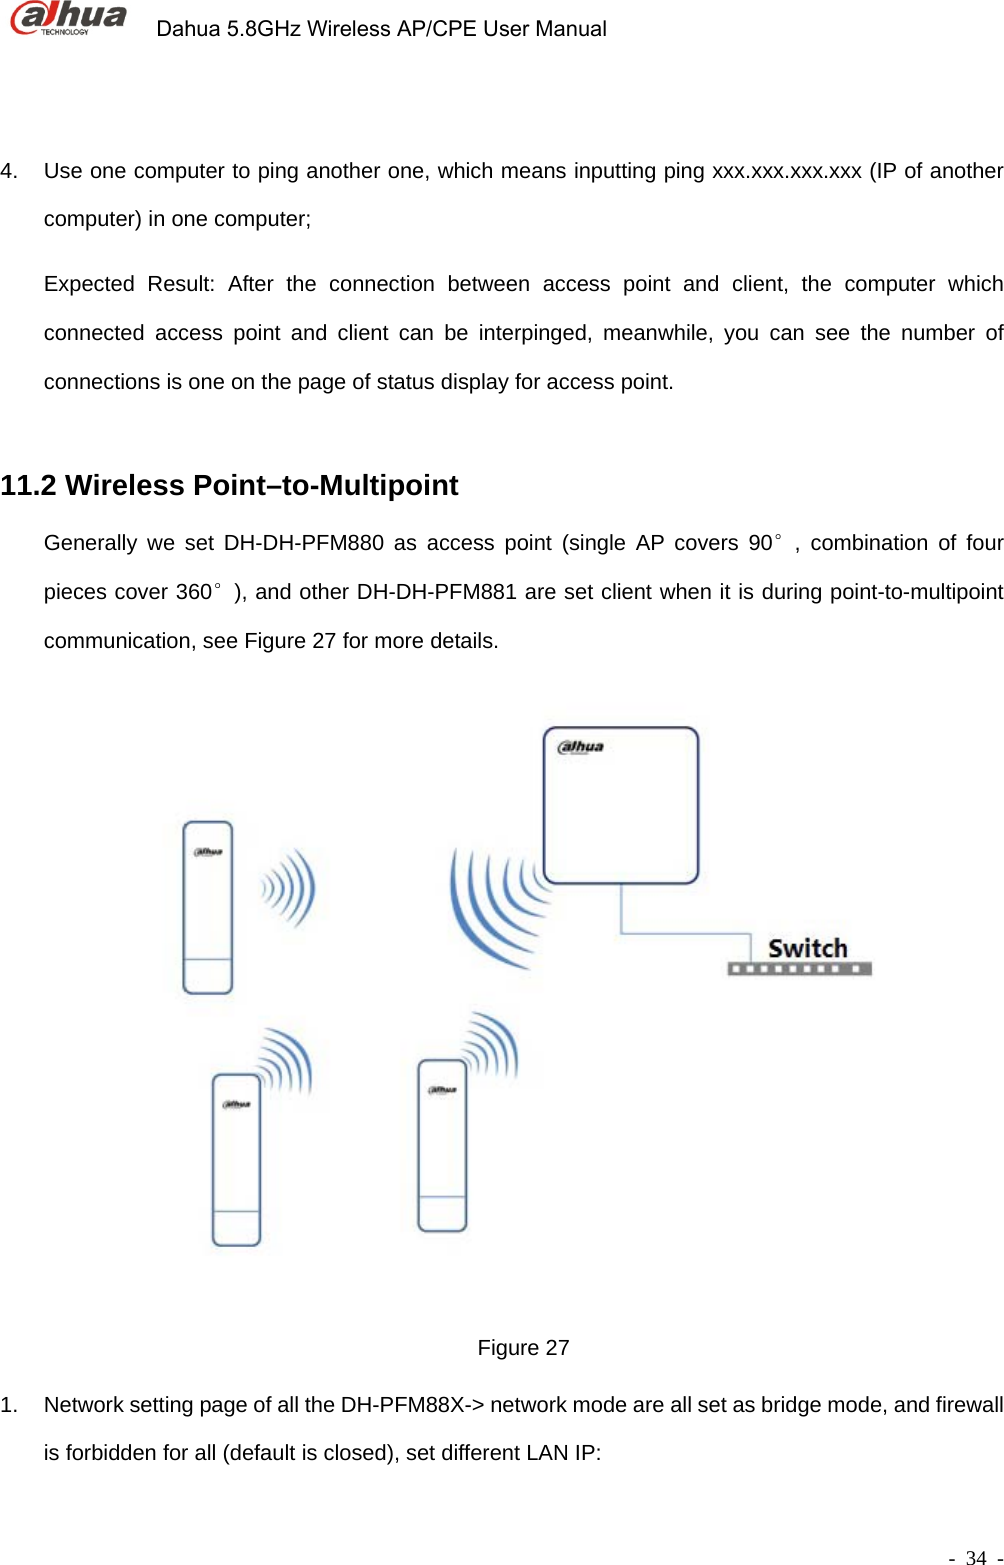             Dahua 5.8GHz Wireless AP/CPE User Manual        - 34 -  4.  Use one computer to ping another one, which means inputting ping xxx.xxx.xxx.xxx (IP of another computer) in one computer;   Expected Result: After the connection between access point and client, the computer which connected access point and client can be interpinged, meanwhile, you can see the number of connections is one on the page of status display for access point.       11.2 Wireless Point–to-Multipoint   Generally we set DH-DH-PFM880 as access point (single AP covers 90°, combination of four pieces cover 360°), and other DH-DH-PFM881 are set client when it is during point-to-multipoint communication, see Figure 27 for more details.   Figure 27 1.  Network setting page of all the DH-PFM88X-&gt; network mode are all set as bridge mode, and firewall is forbidden for all (default is closed), set different LAN IP: 